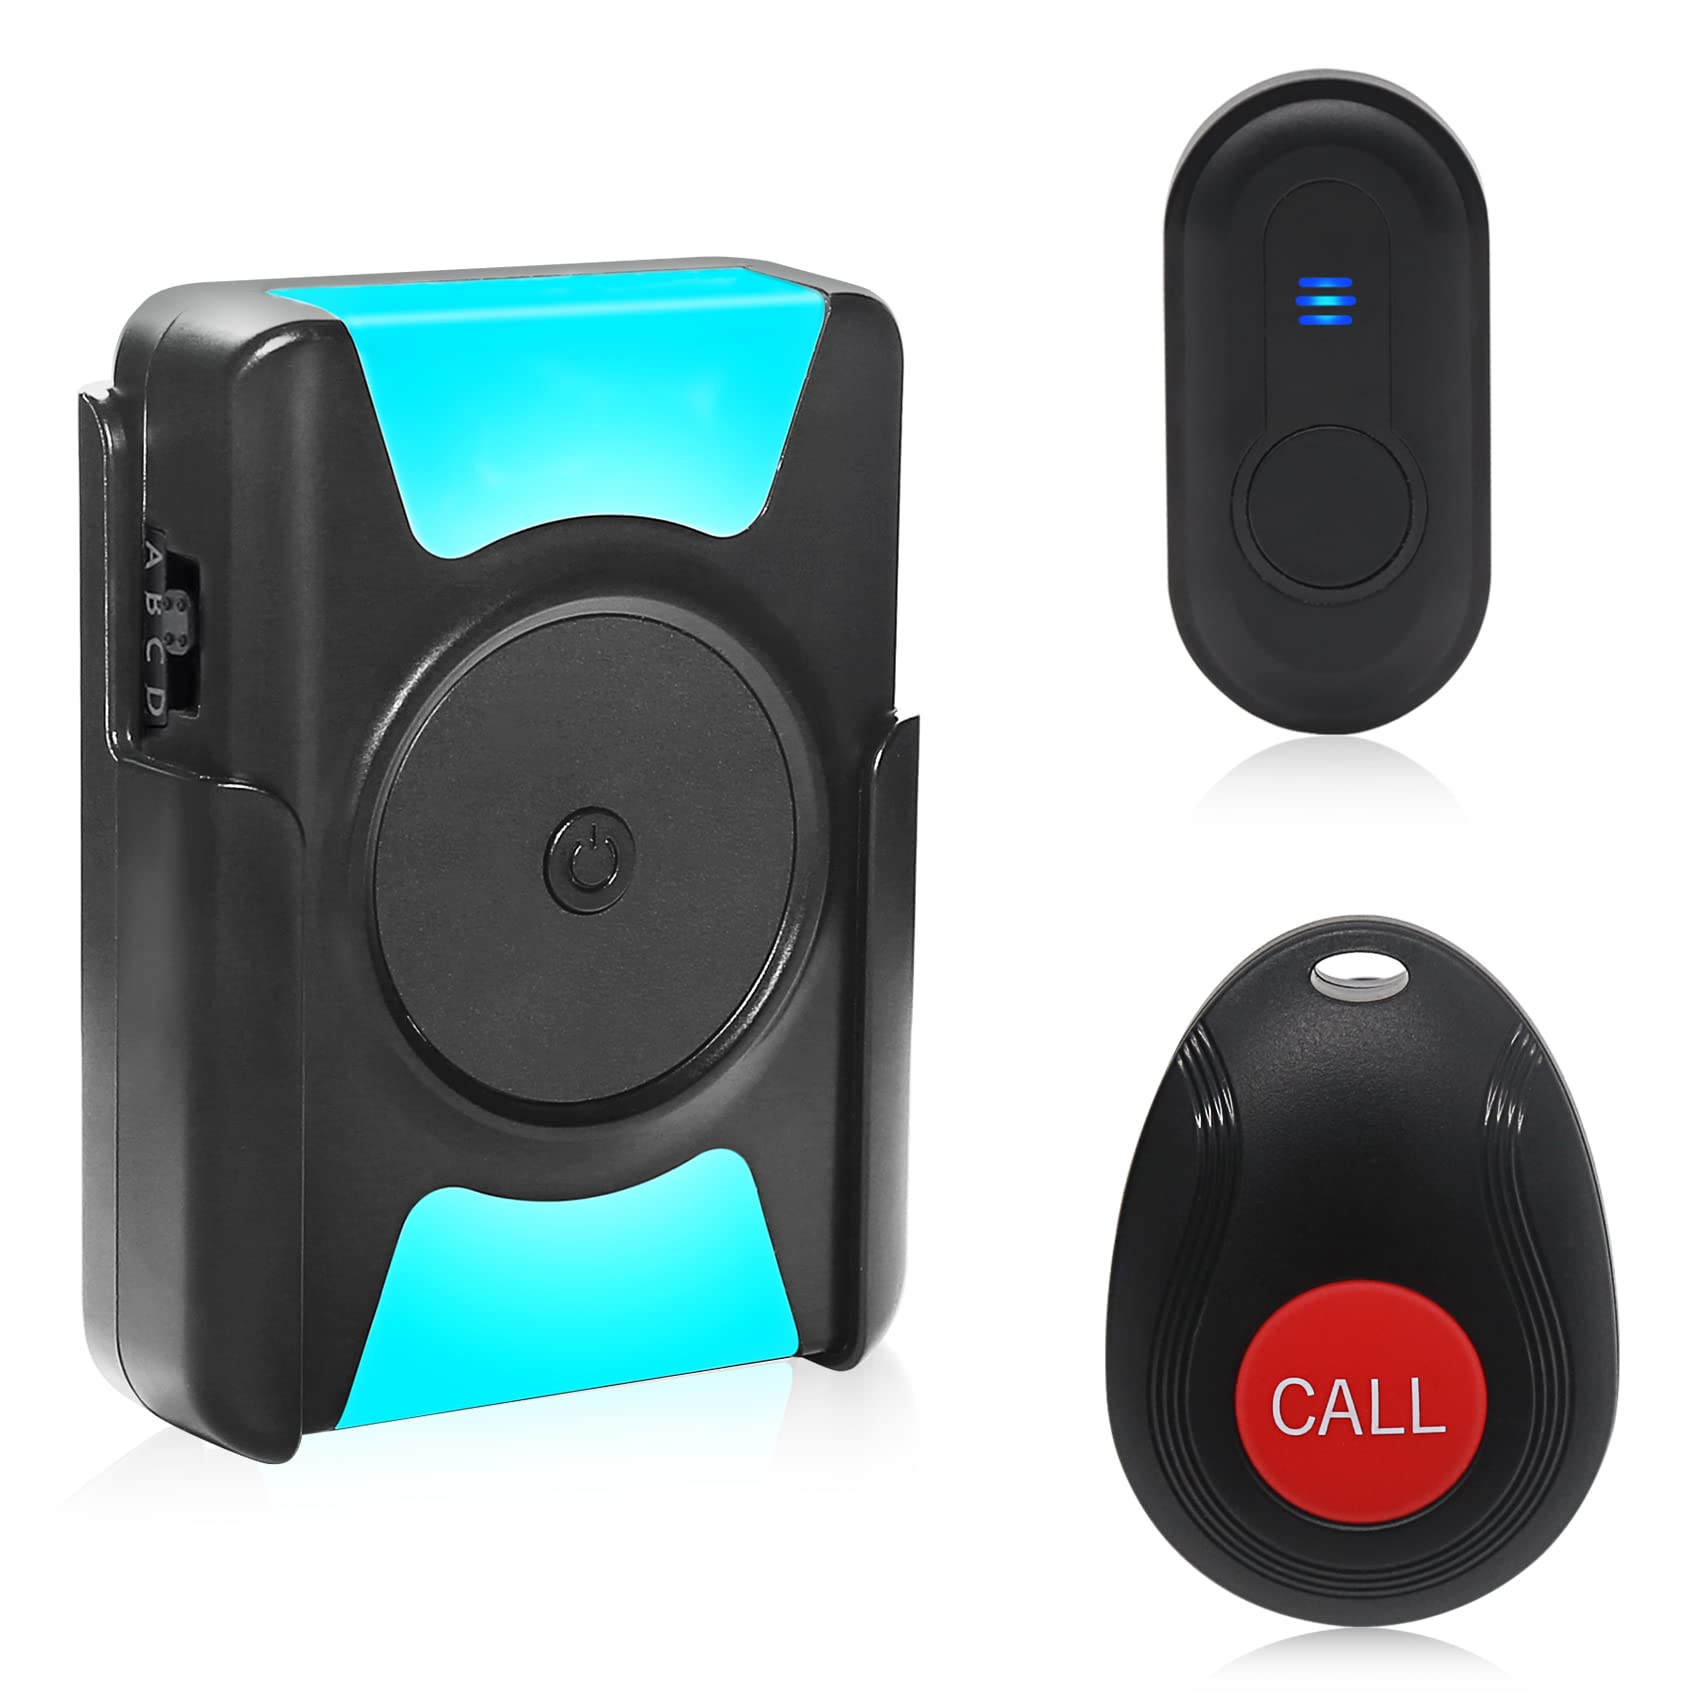 CallToU CC21 is a smart doorbell that will get your attention in your preferred way, without disturbing others.